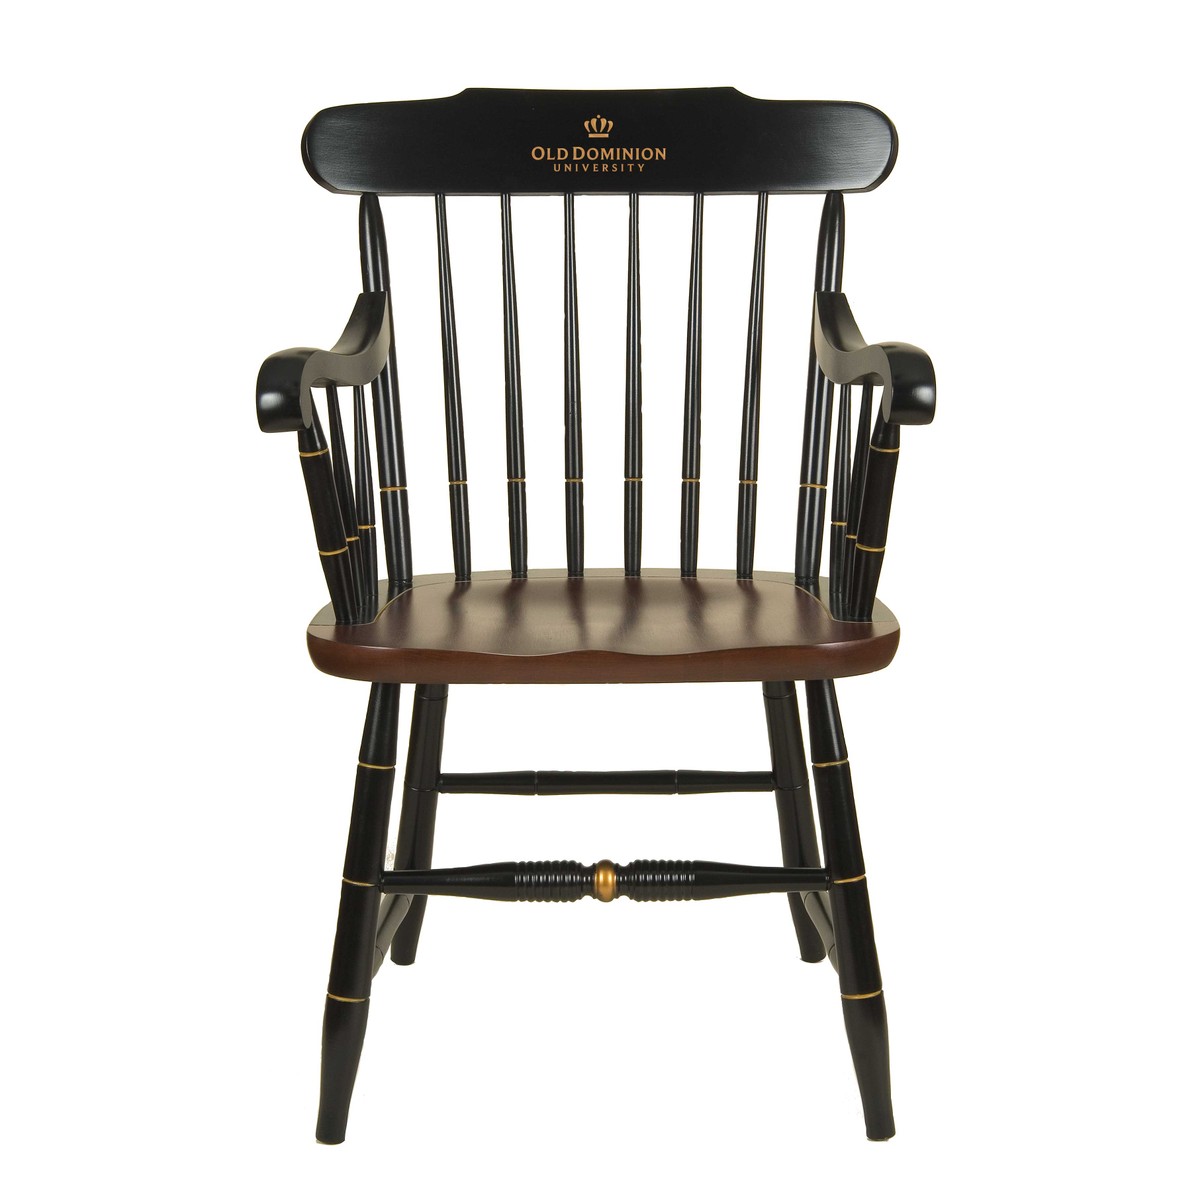 Old Dominion Captain Chair - Graduation Gift Selection